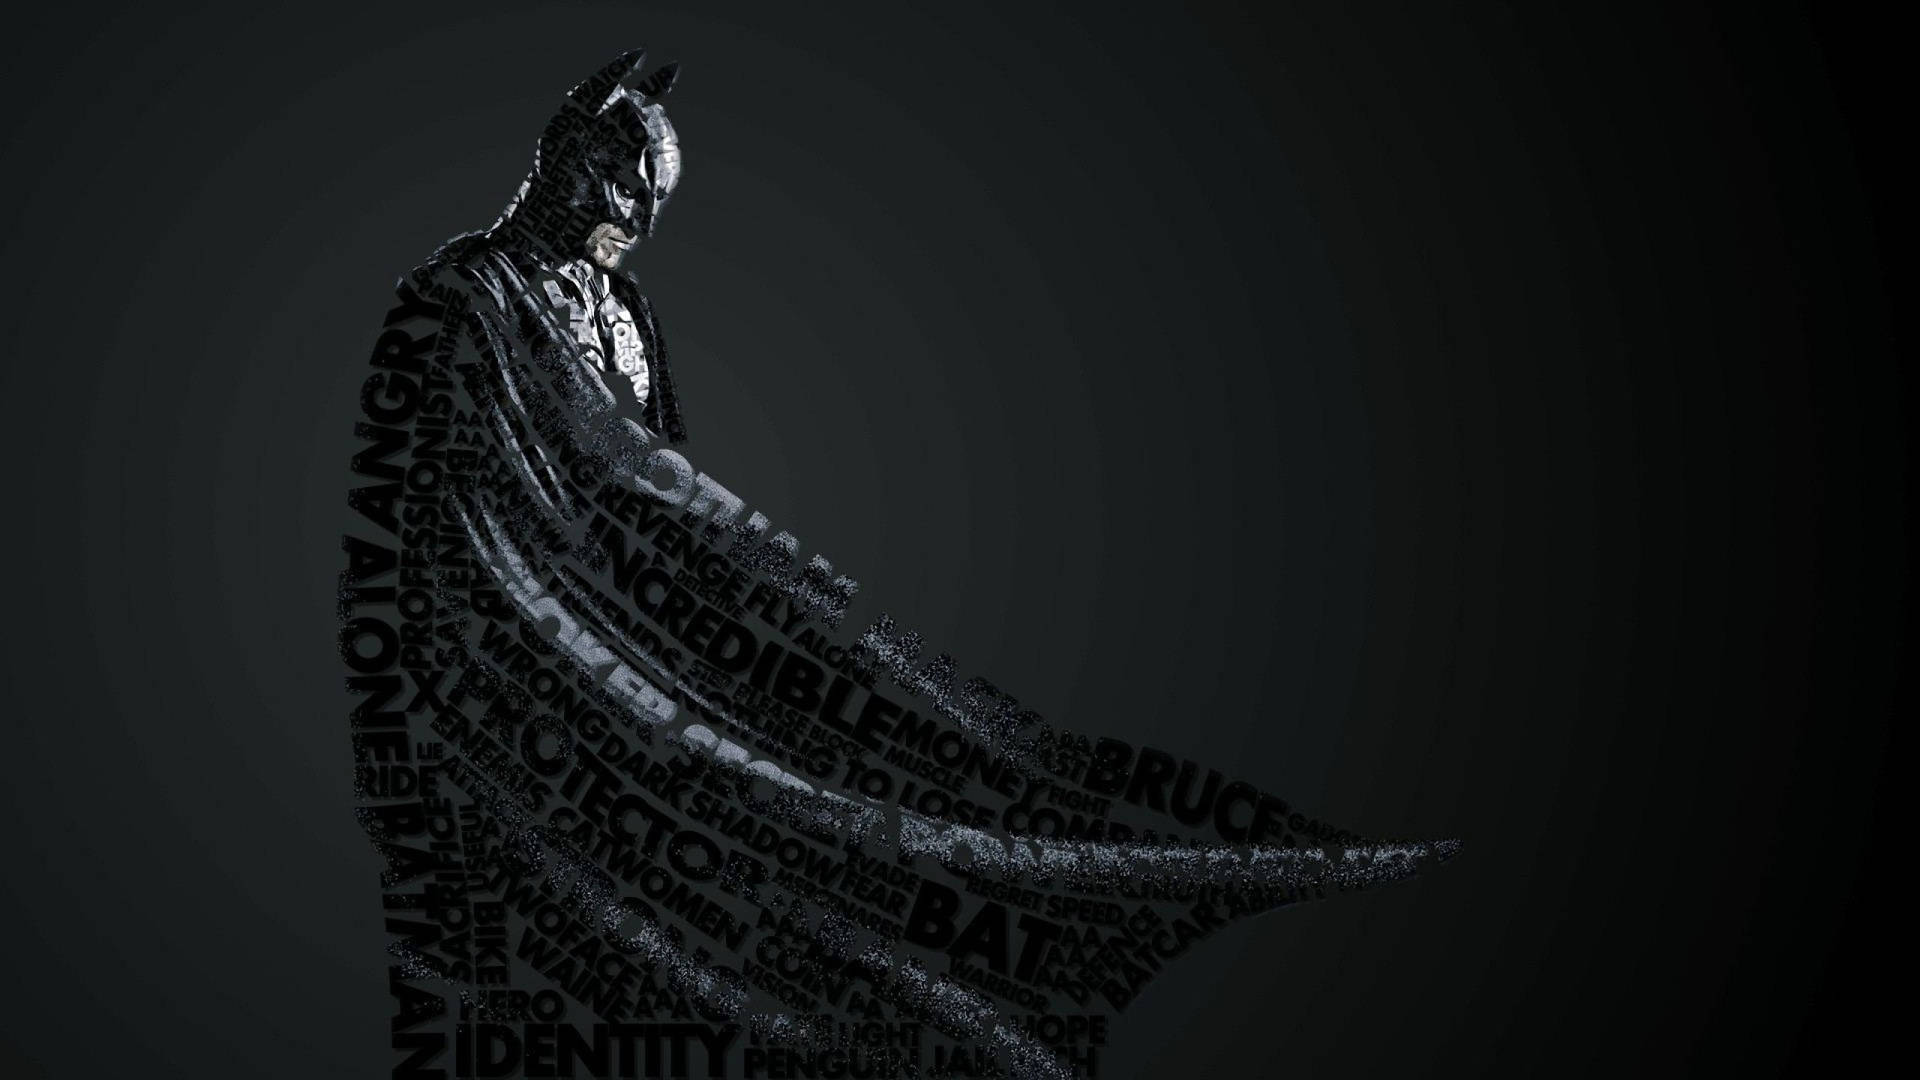 The Dark Knight rises from the shadows Wallpaper